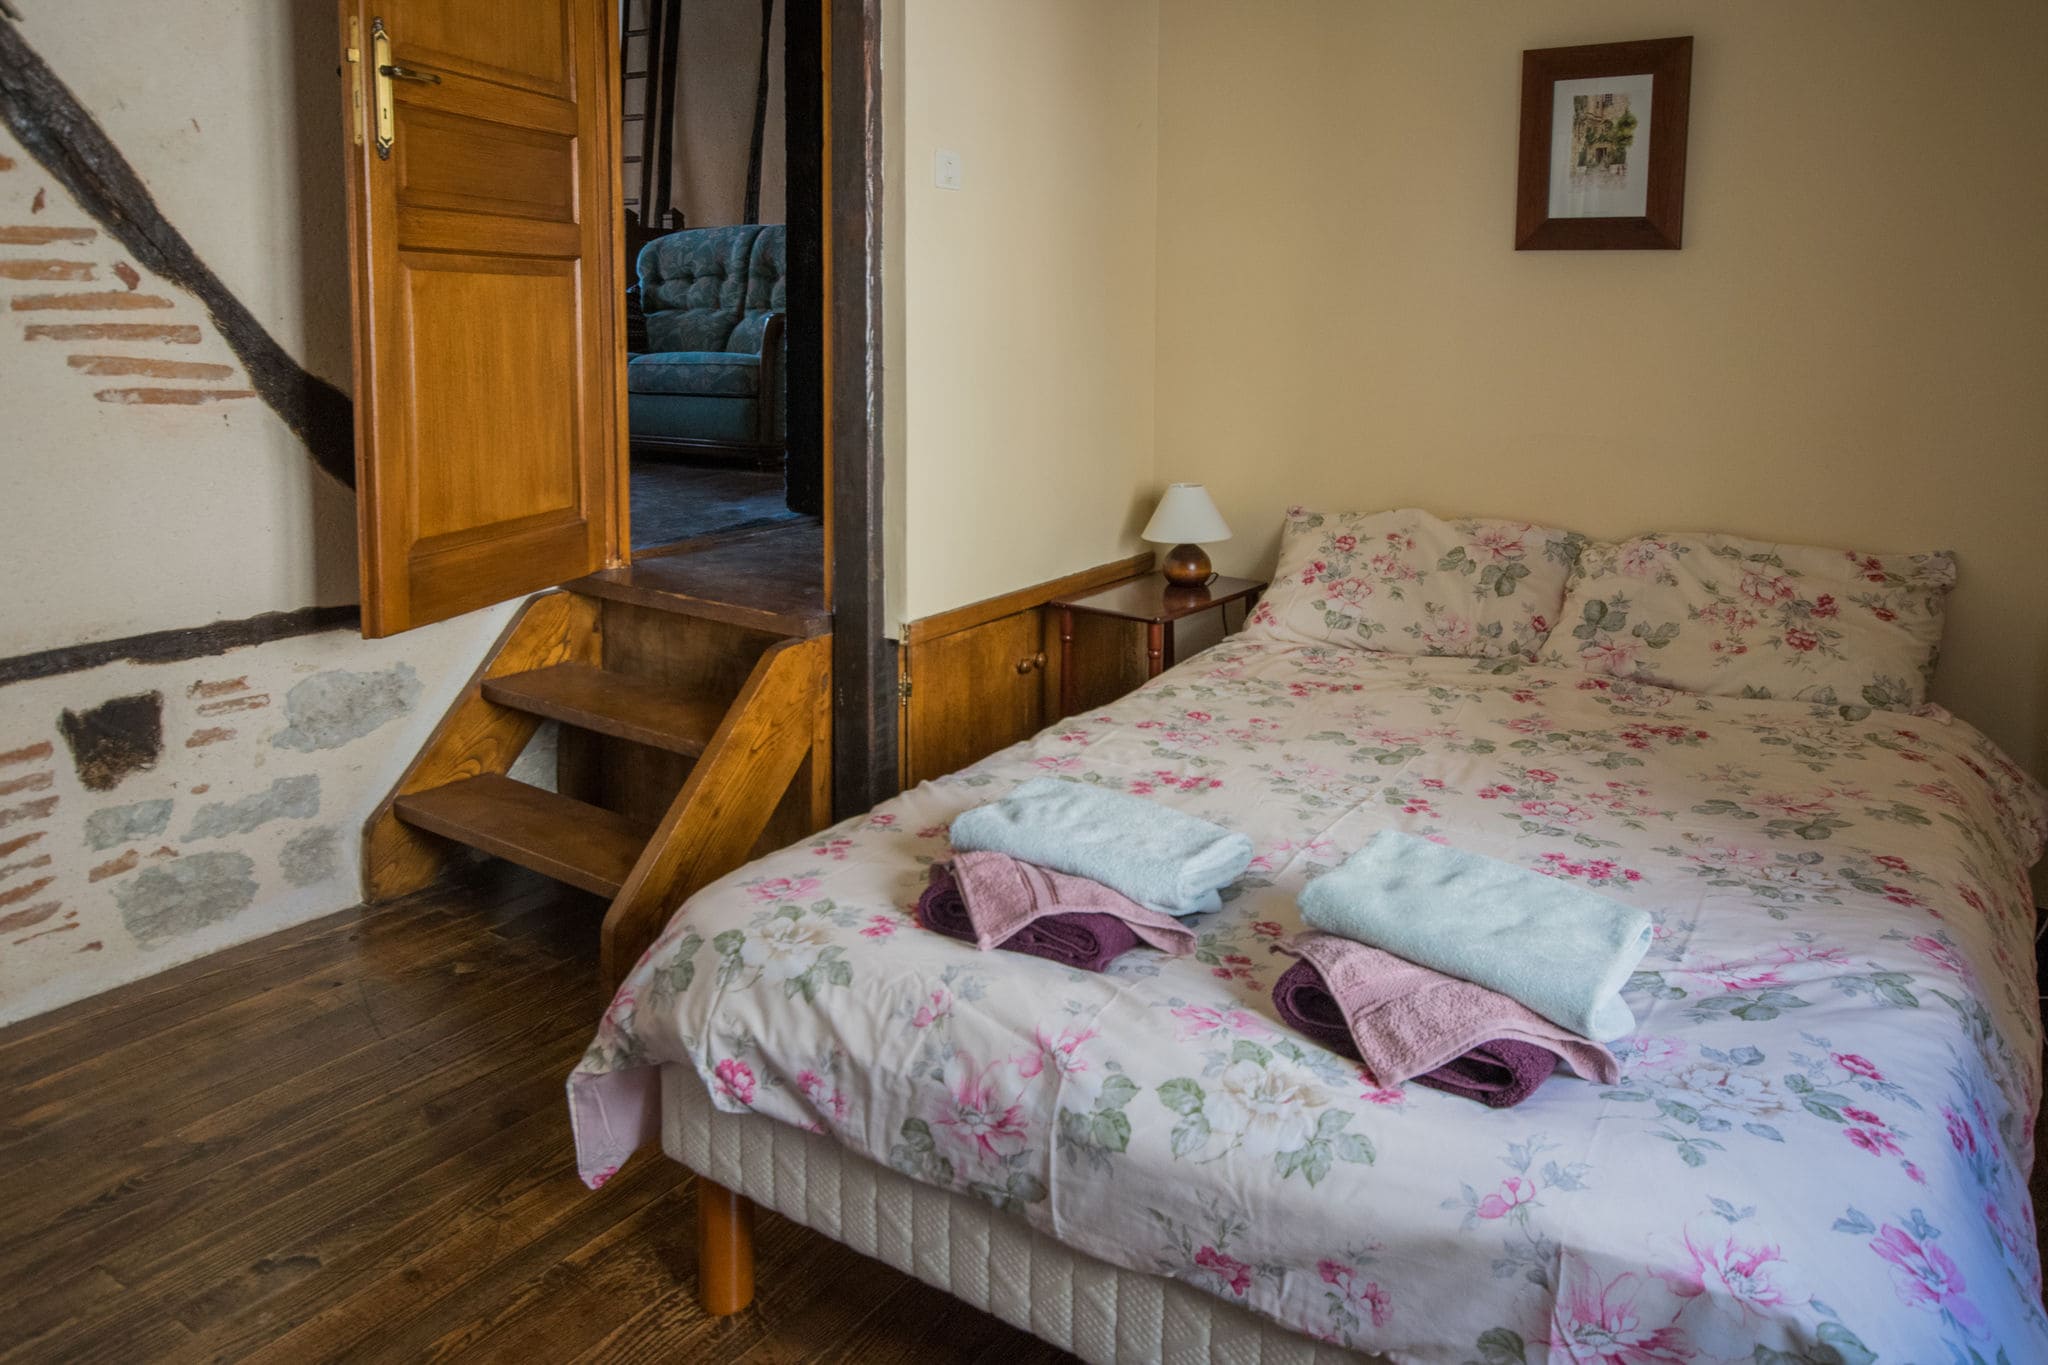 Authentic city house in the old centre of Puy L'Eveque, directly by the Lot.